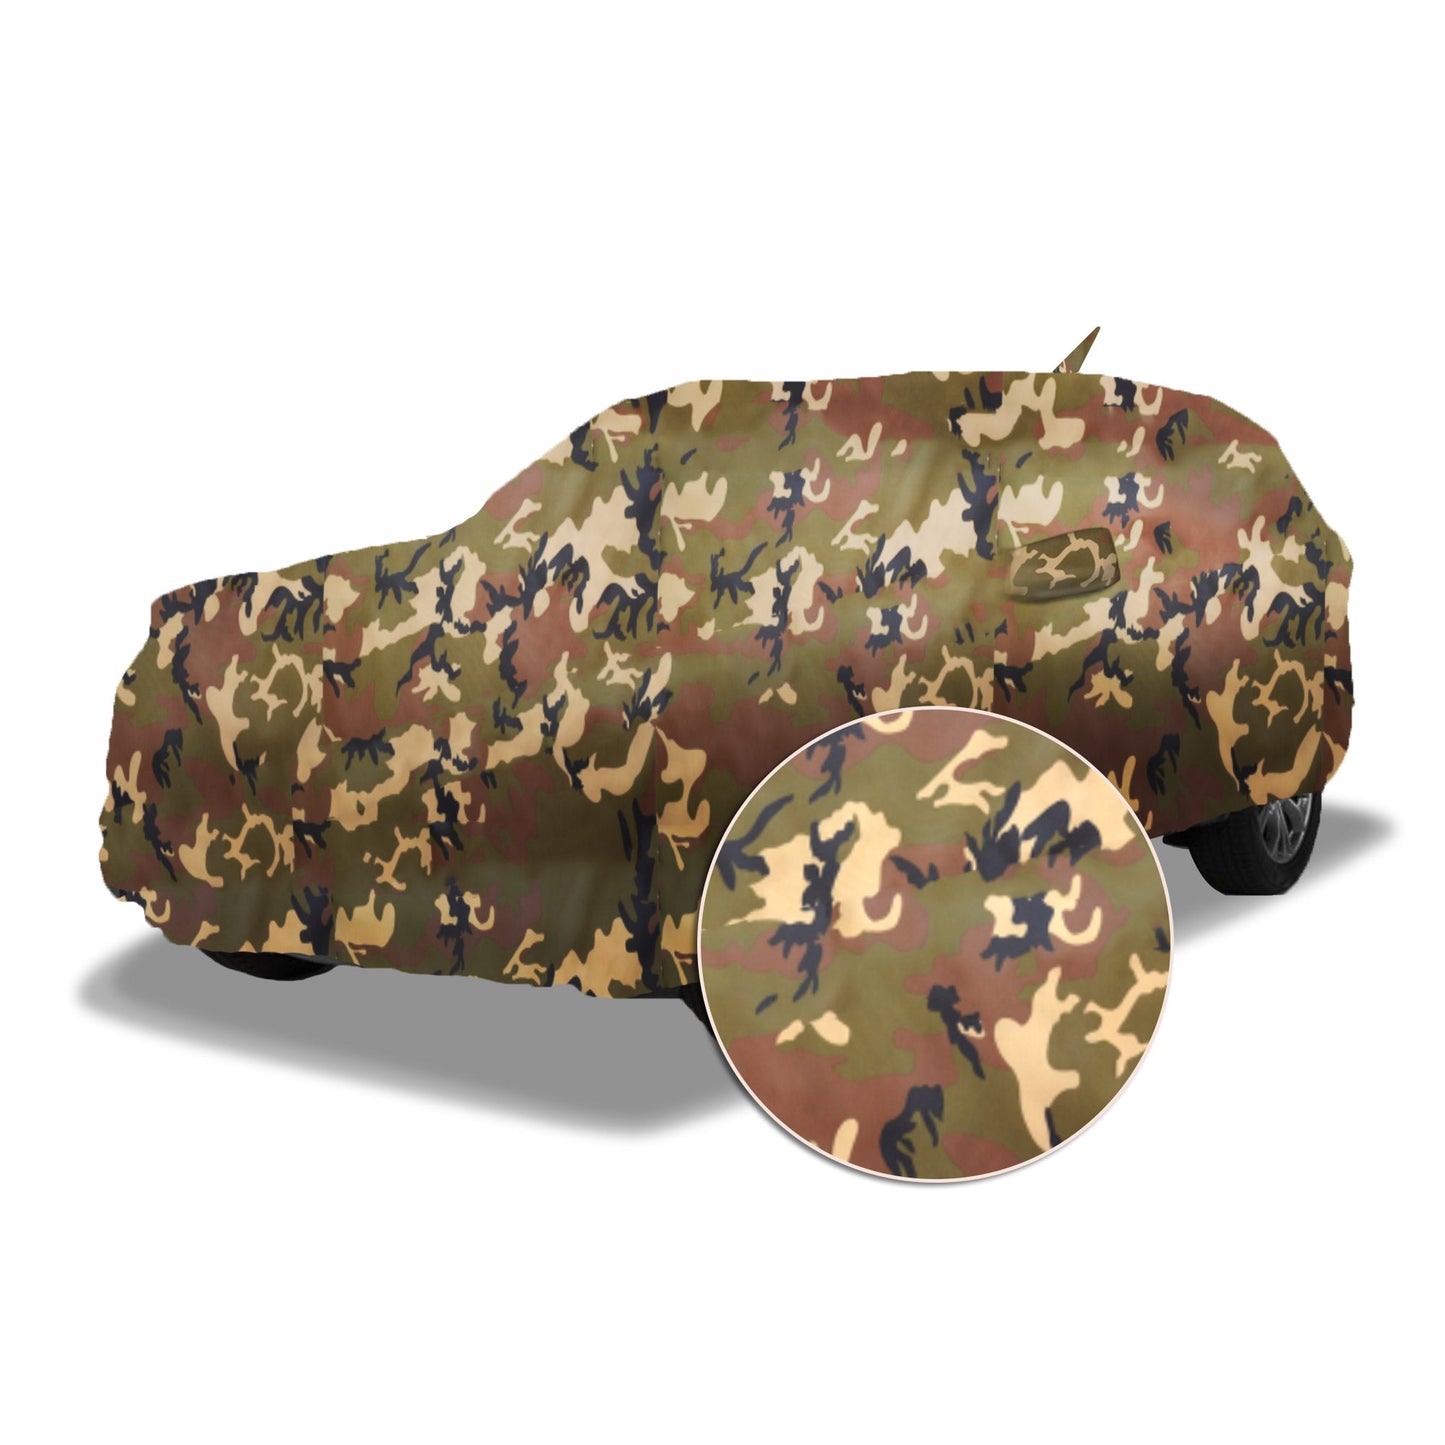 Ascot Honda Jazz Car Body Cover Extra Strong & Dust Proof Jungle Military Car Cover with UV Proof & Water-Resistant Coating